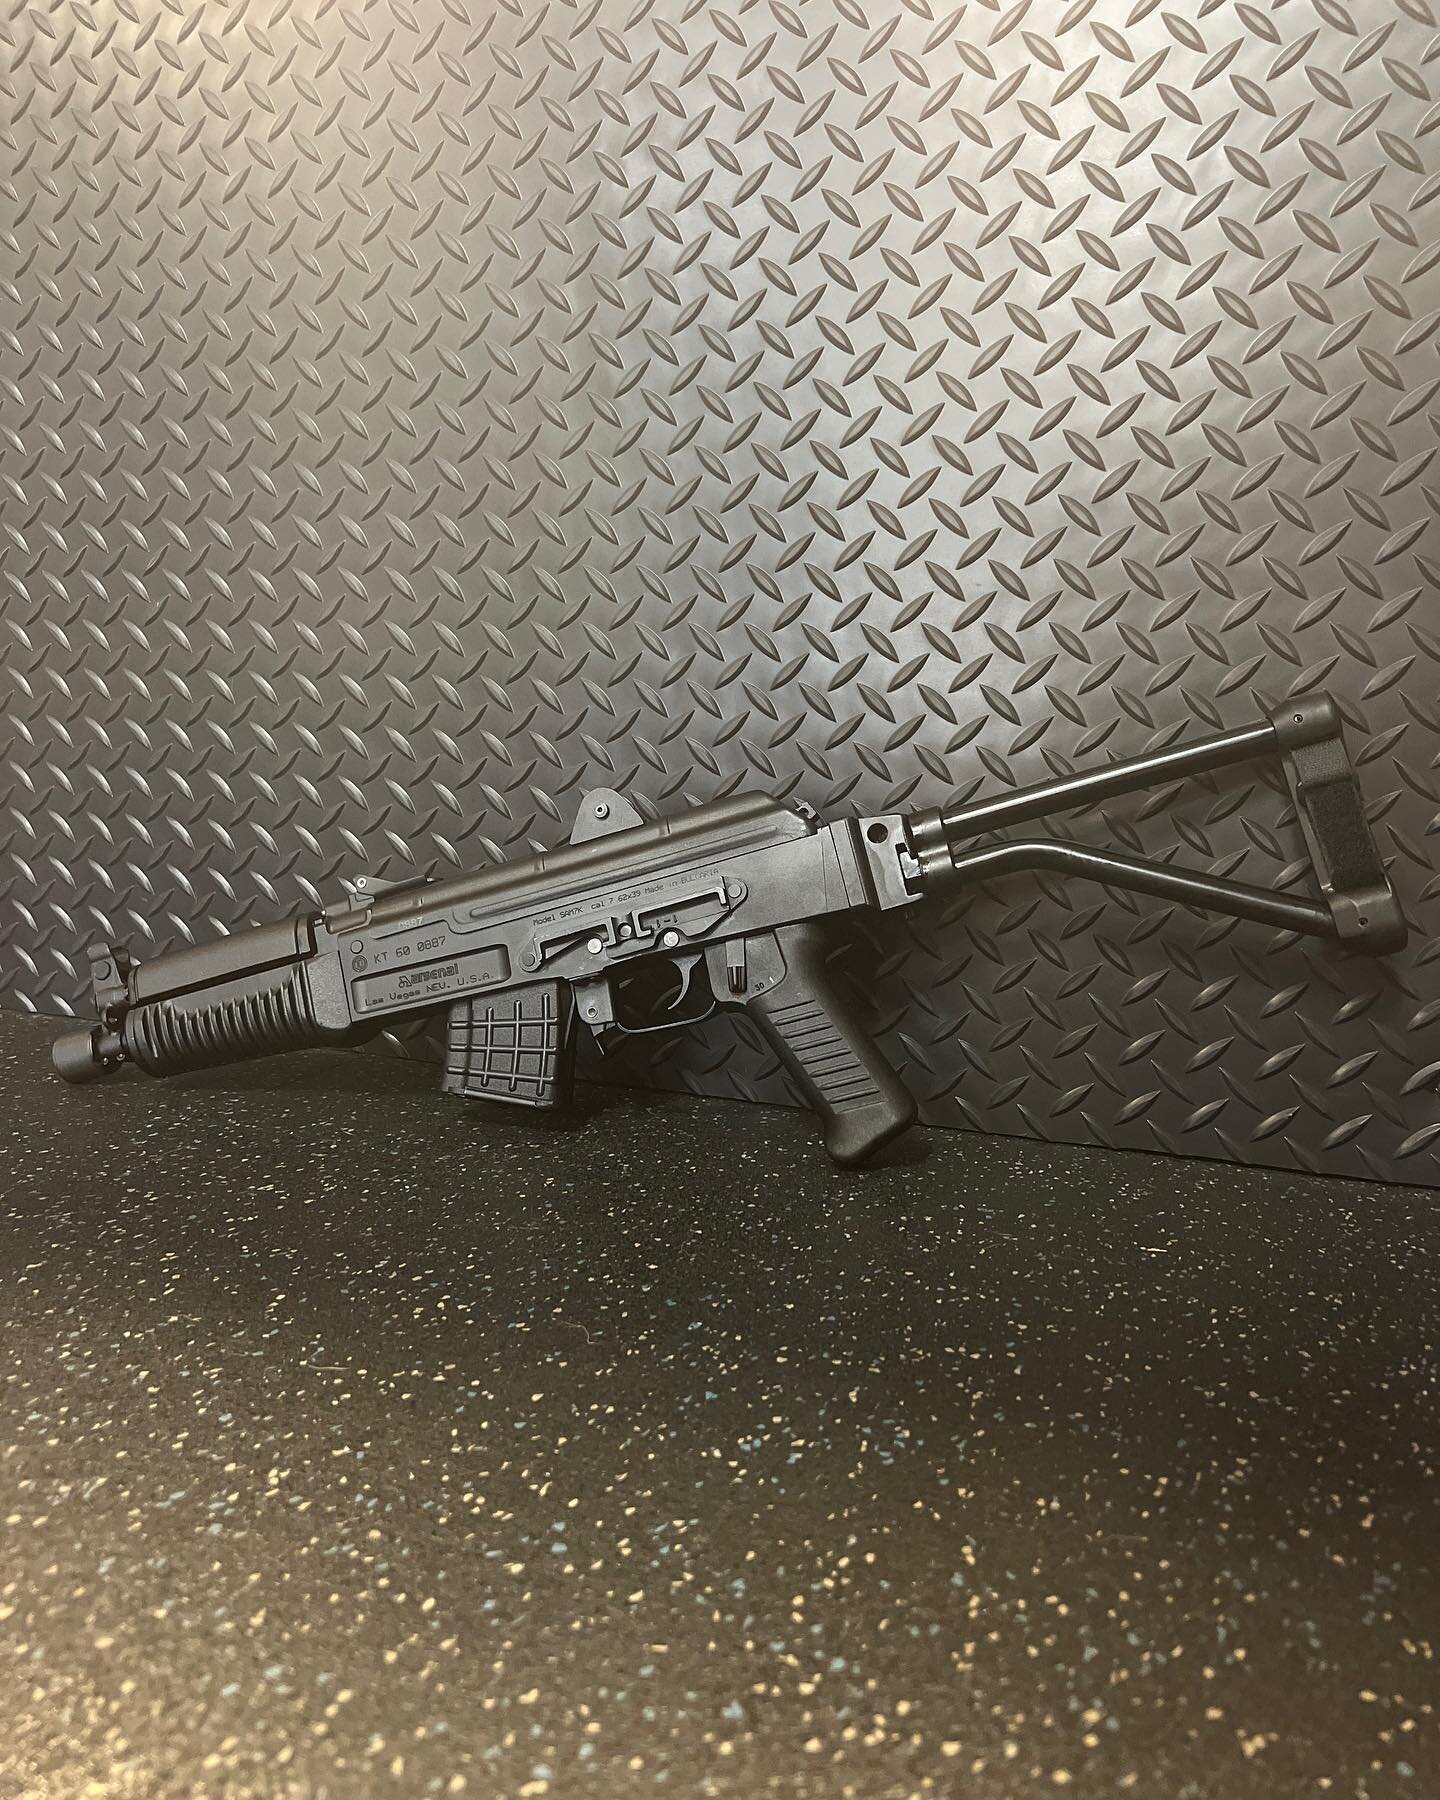 A beautiful new ARSENAL SAM7K-44 ready for her new owner! Outfitted with the CNC Warrior brace